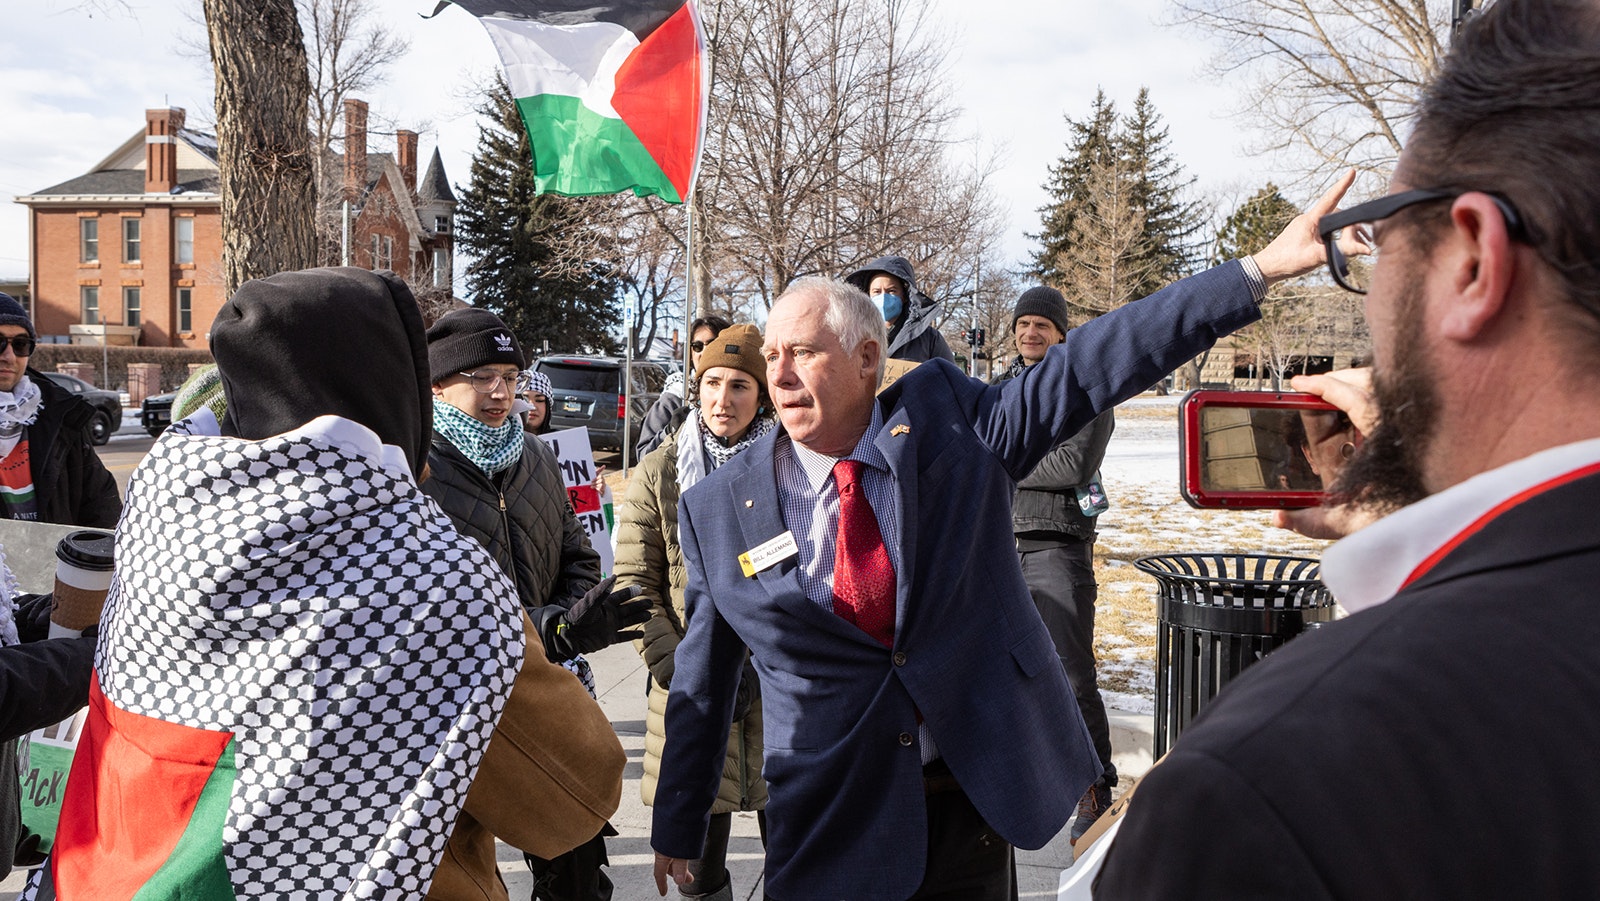 State Rep. Bill Allemand, R-Midwest, talks with a small group of pro-Palestine protesters gathered at the Wyoming State Capitol on Monday.